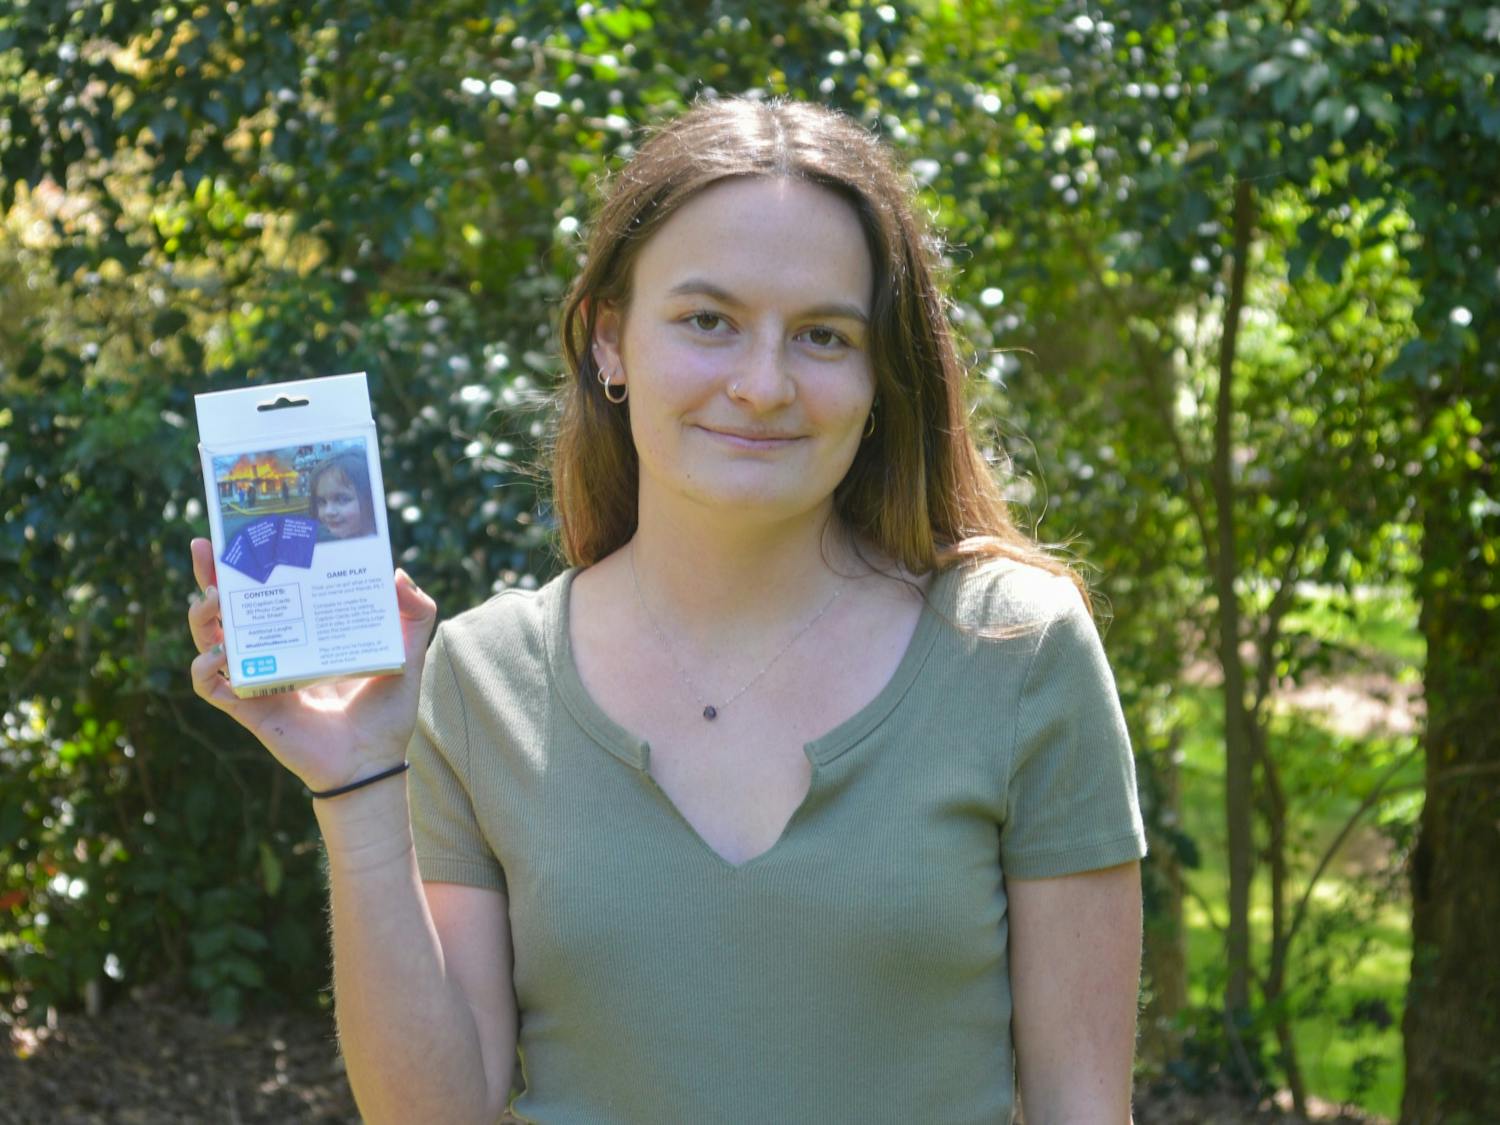 Zoe Roth, a senior peace war and defense major and subject of the meme 'Disaster Girl', holds up the card game What Do You Meme? on Tuesday Apr 13, 2021 in Chapel Hill.